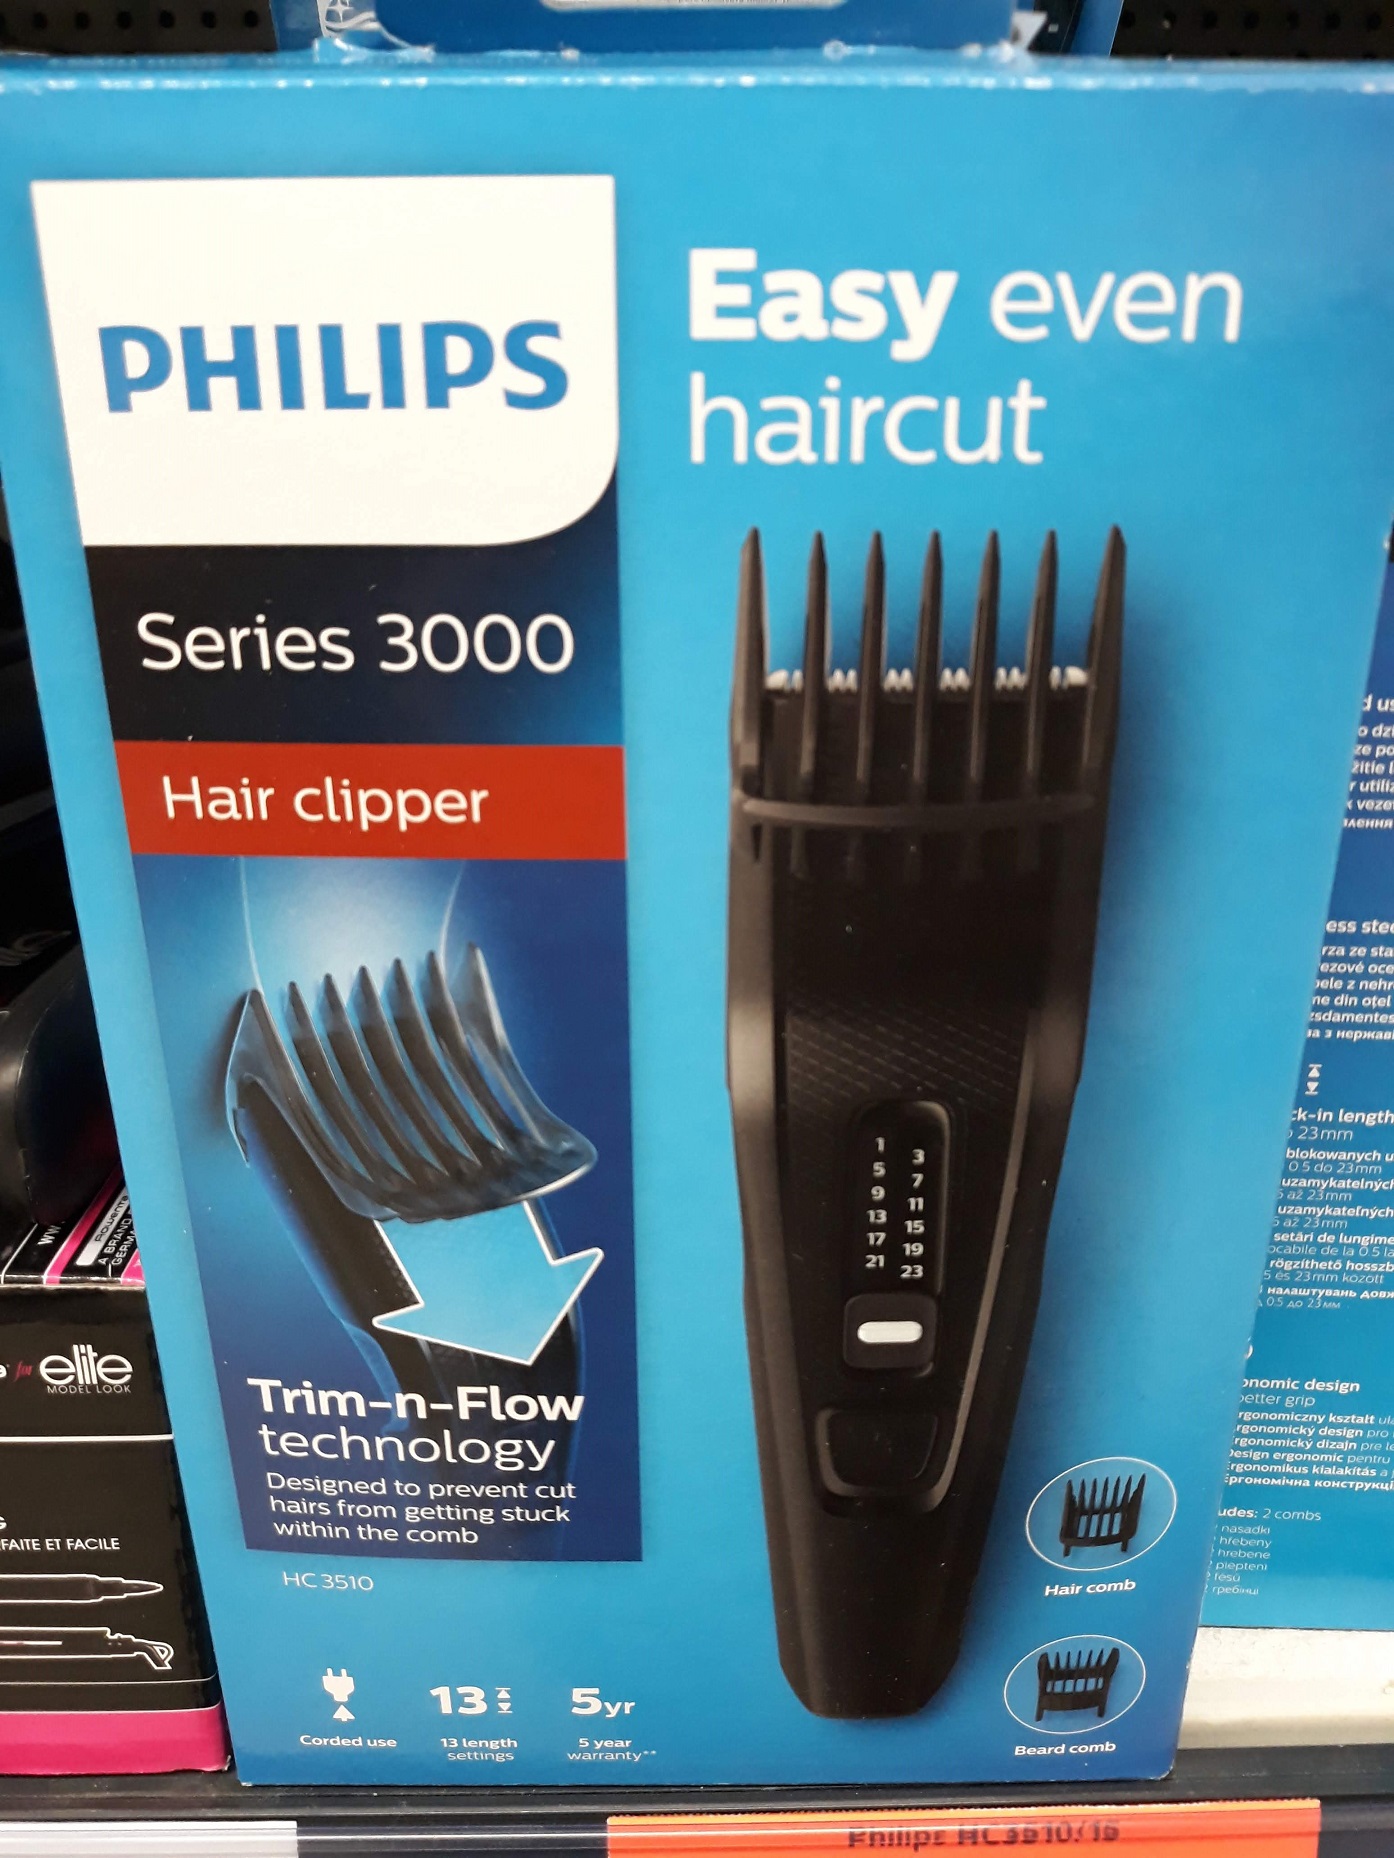 Main features of the Philips Series 3000 hair clippers – are they good enough? post thumbnail image